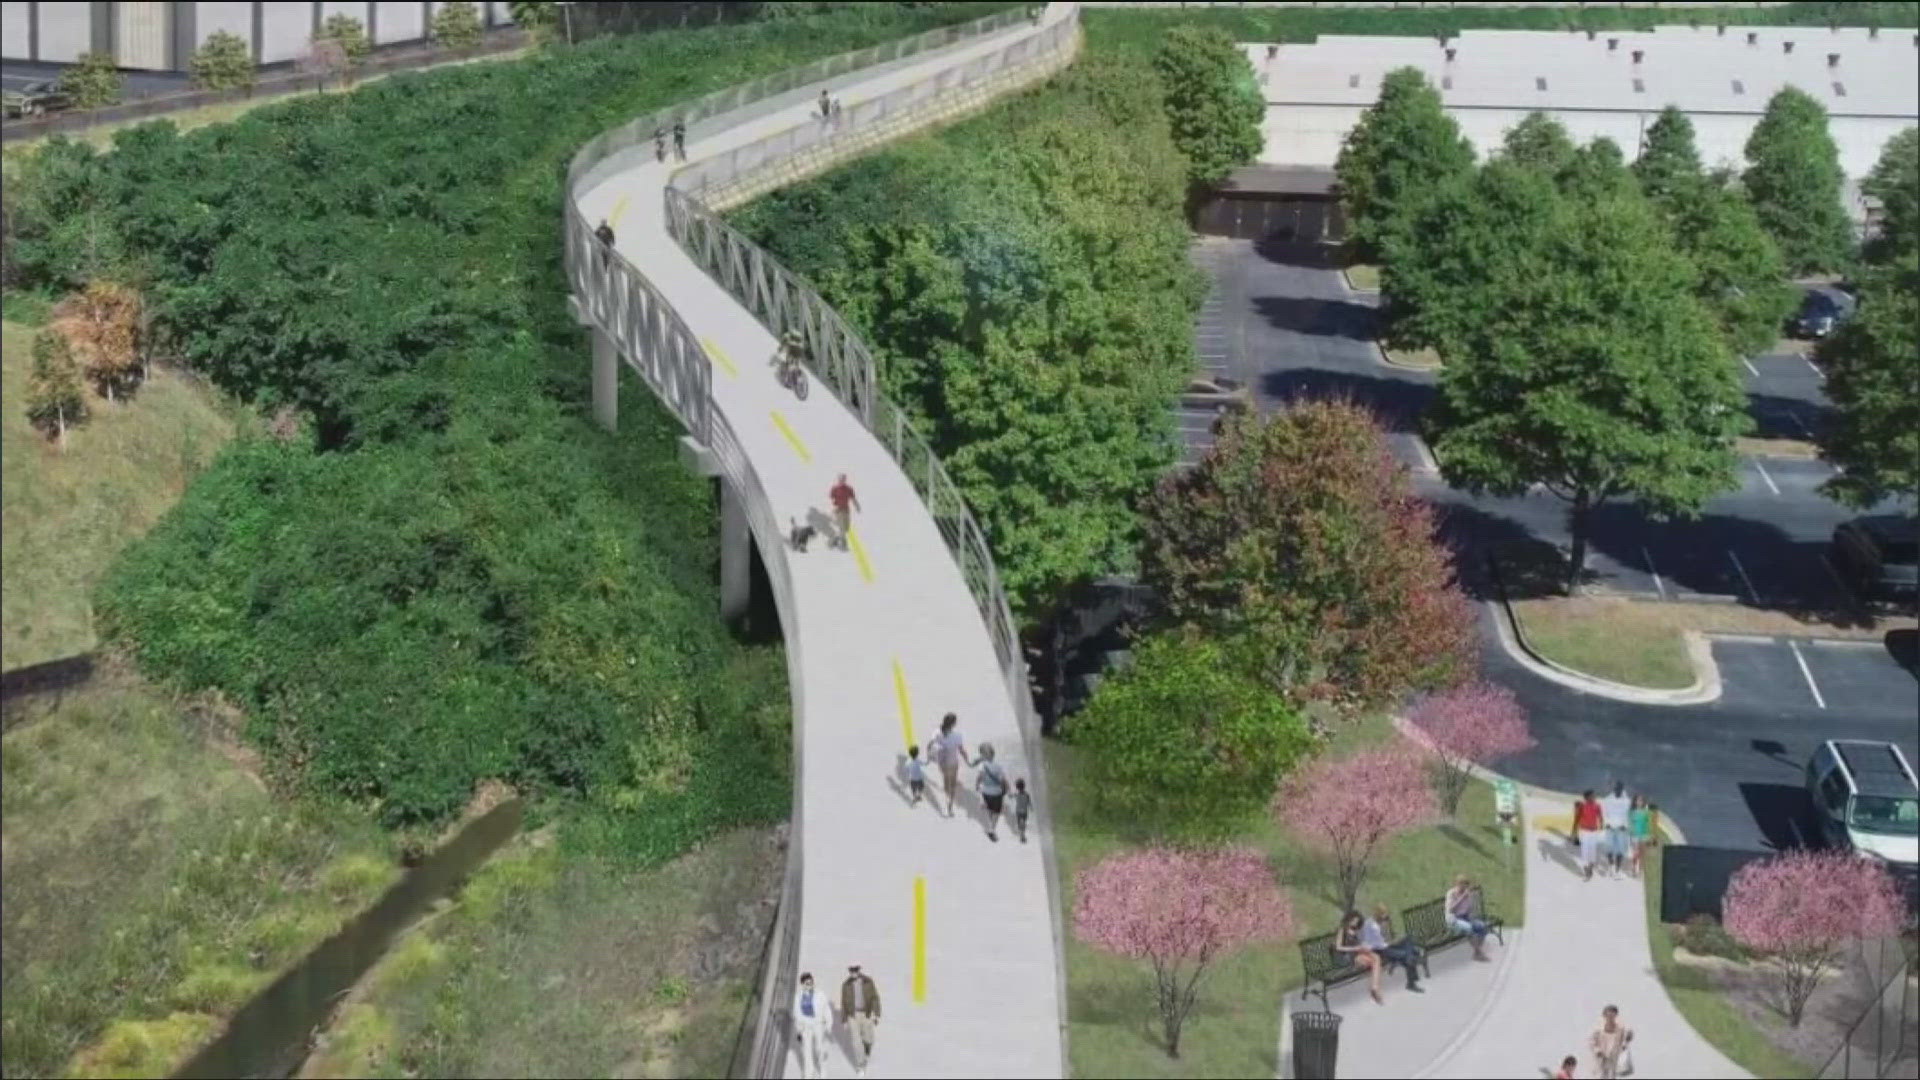 The 17.9 miles of continuous trial includes a mainline trail and a connector to the westside trail.